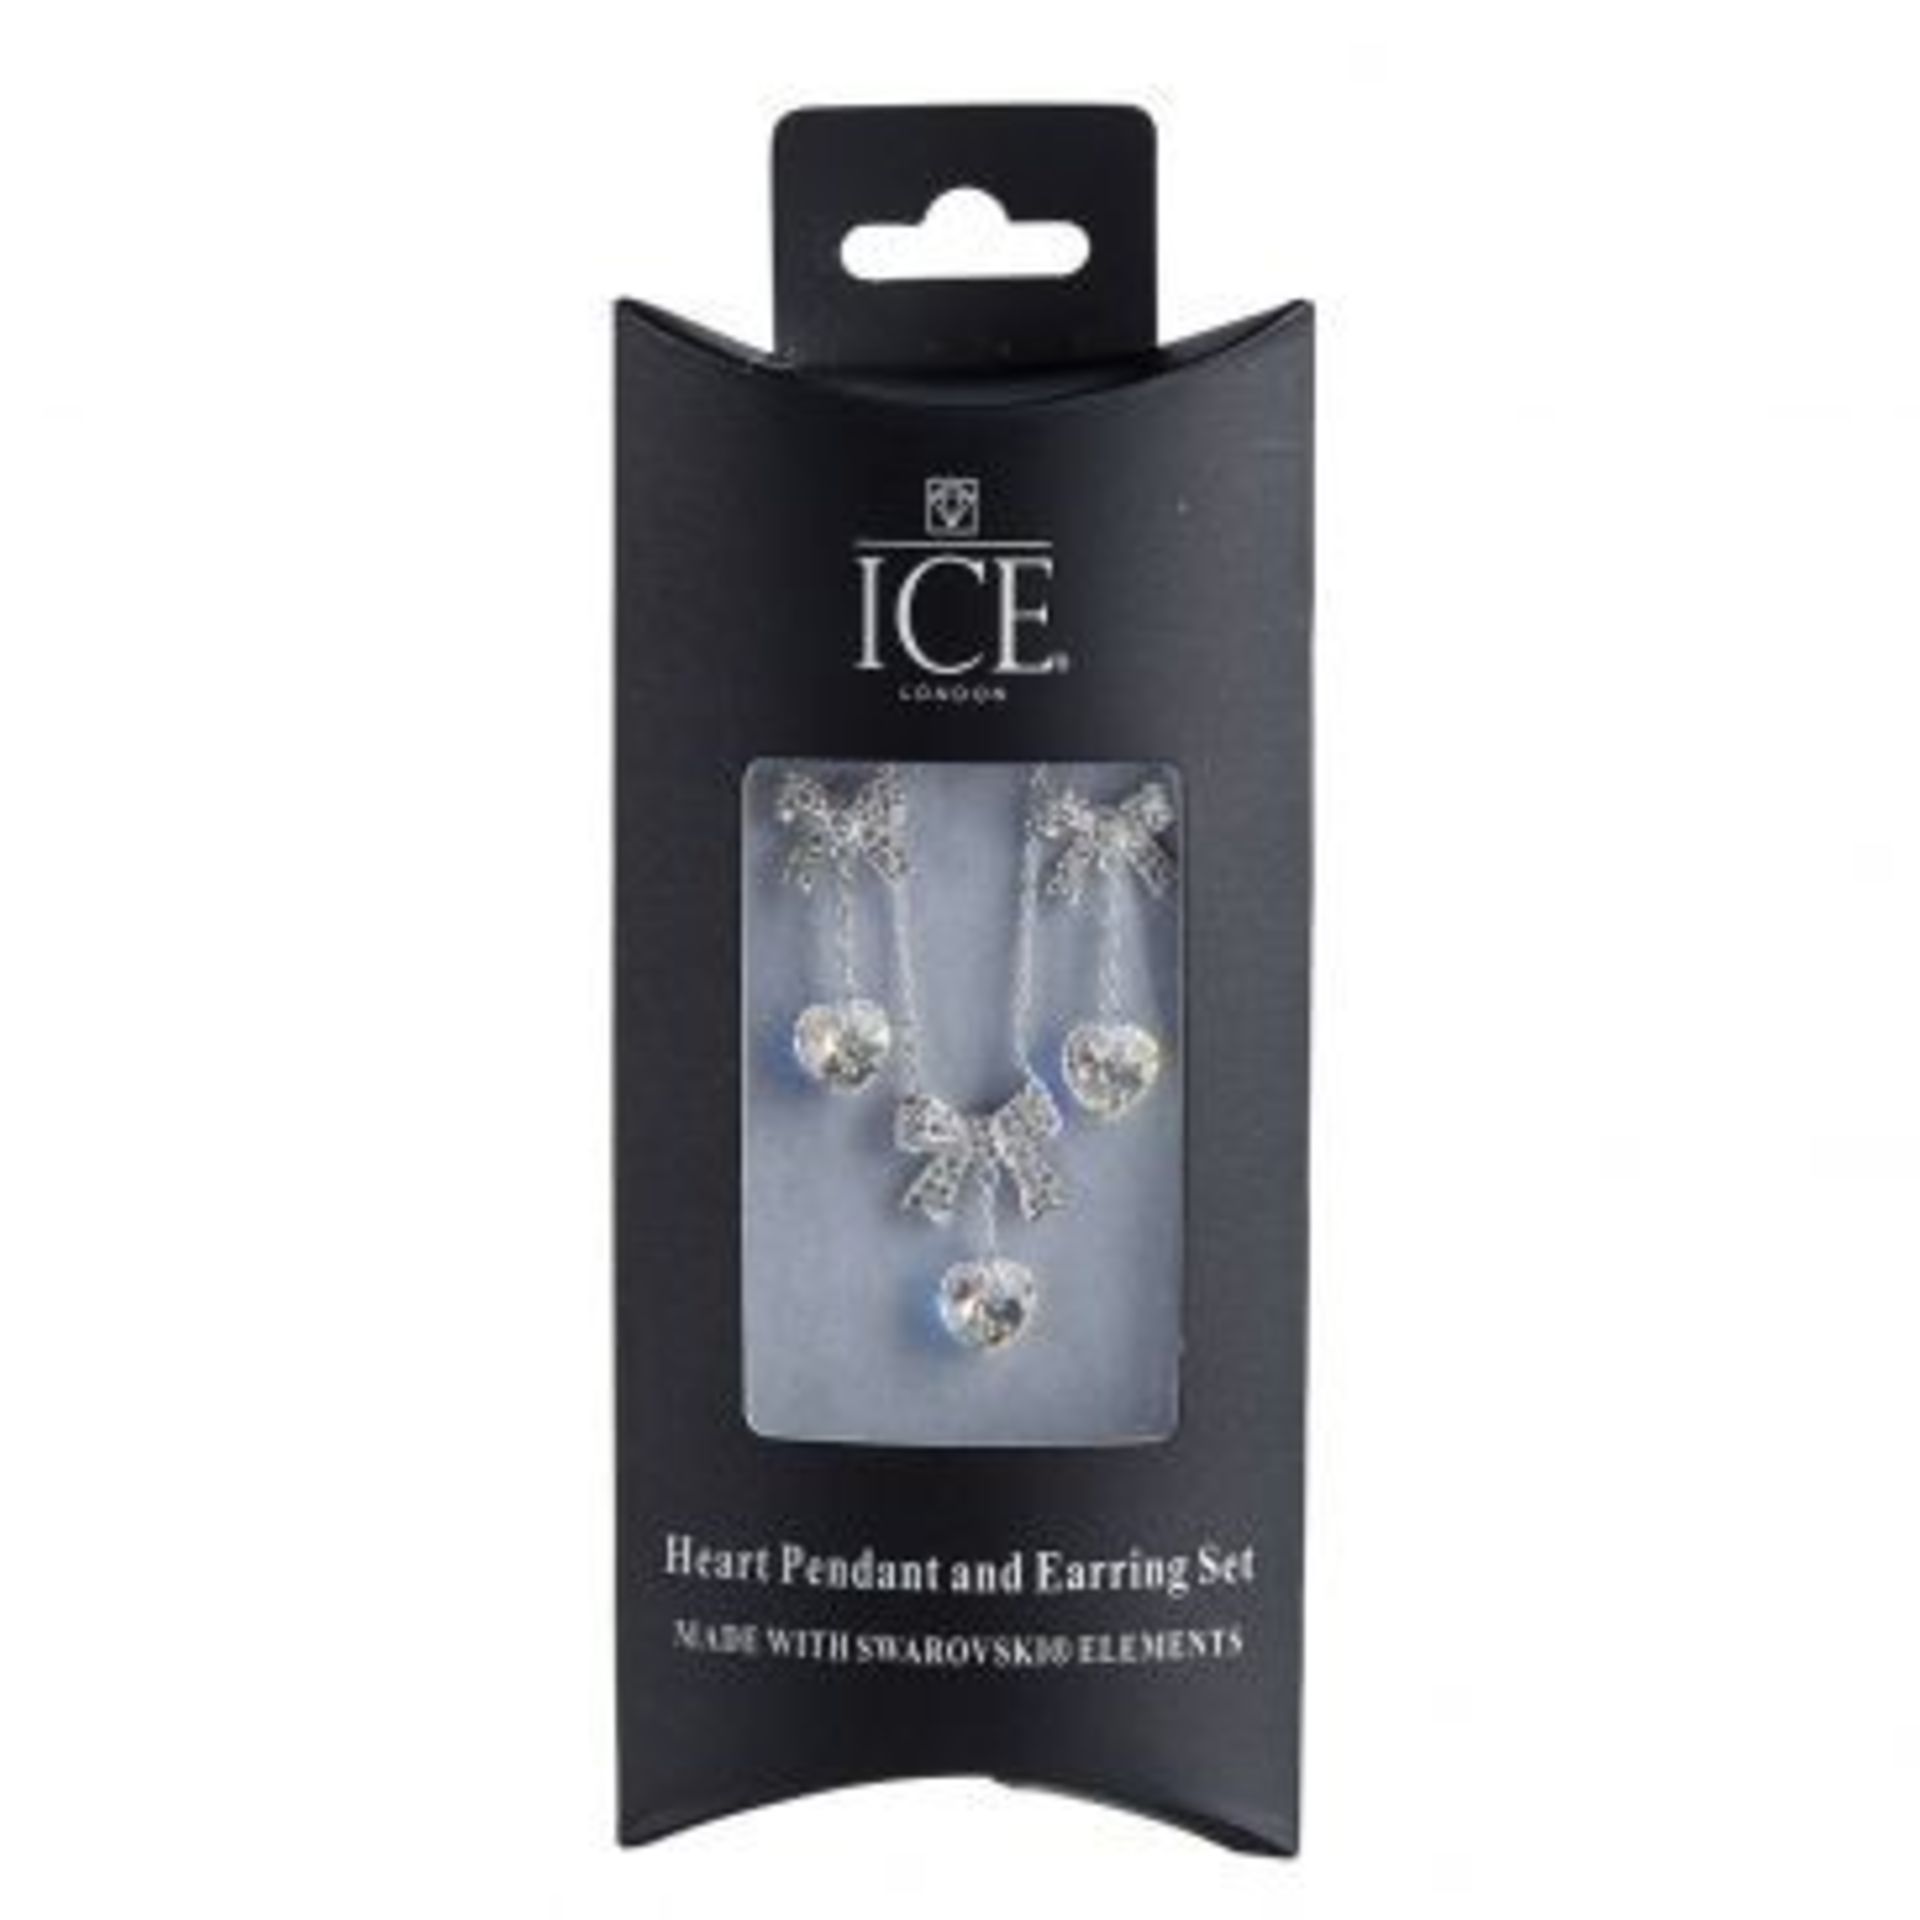 50 x HEART PENDANT AND EARRING SETS By ICE London - EGJ-9900 - Silver-tone Curb Chain Adorned With